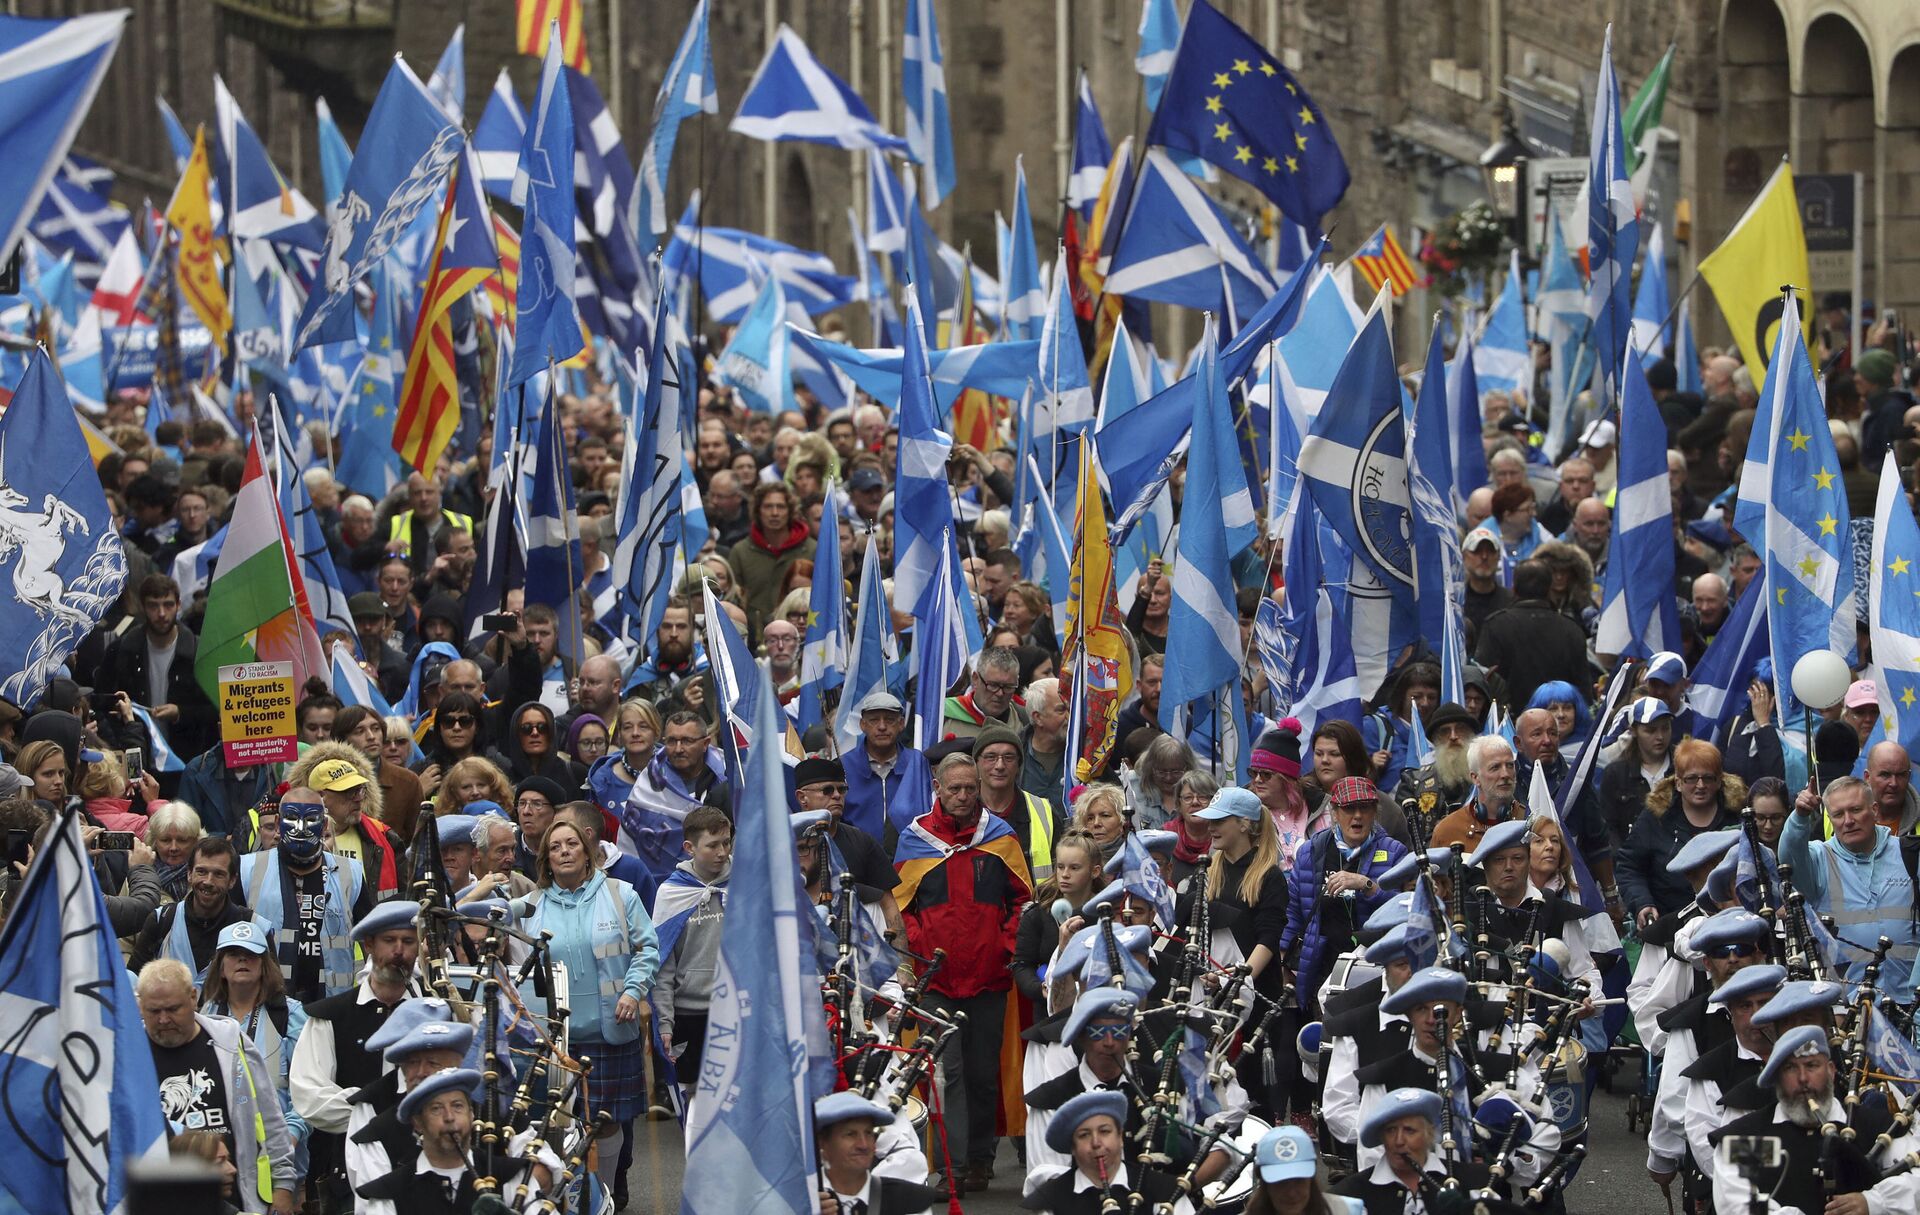 Is Scottish Independence Push Worth the Pain Given COVID and Brexit Impact?   - Sputnik International, 1920, 05.02.2021